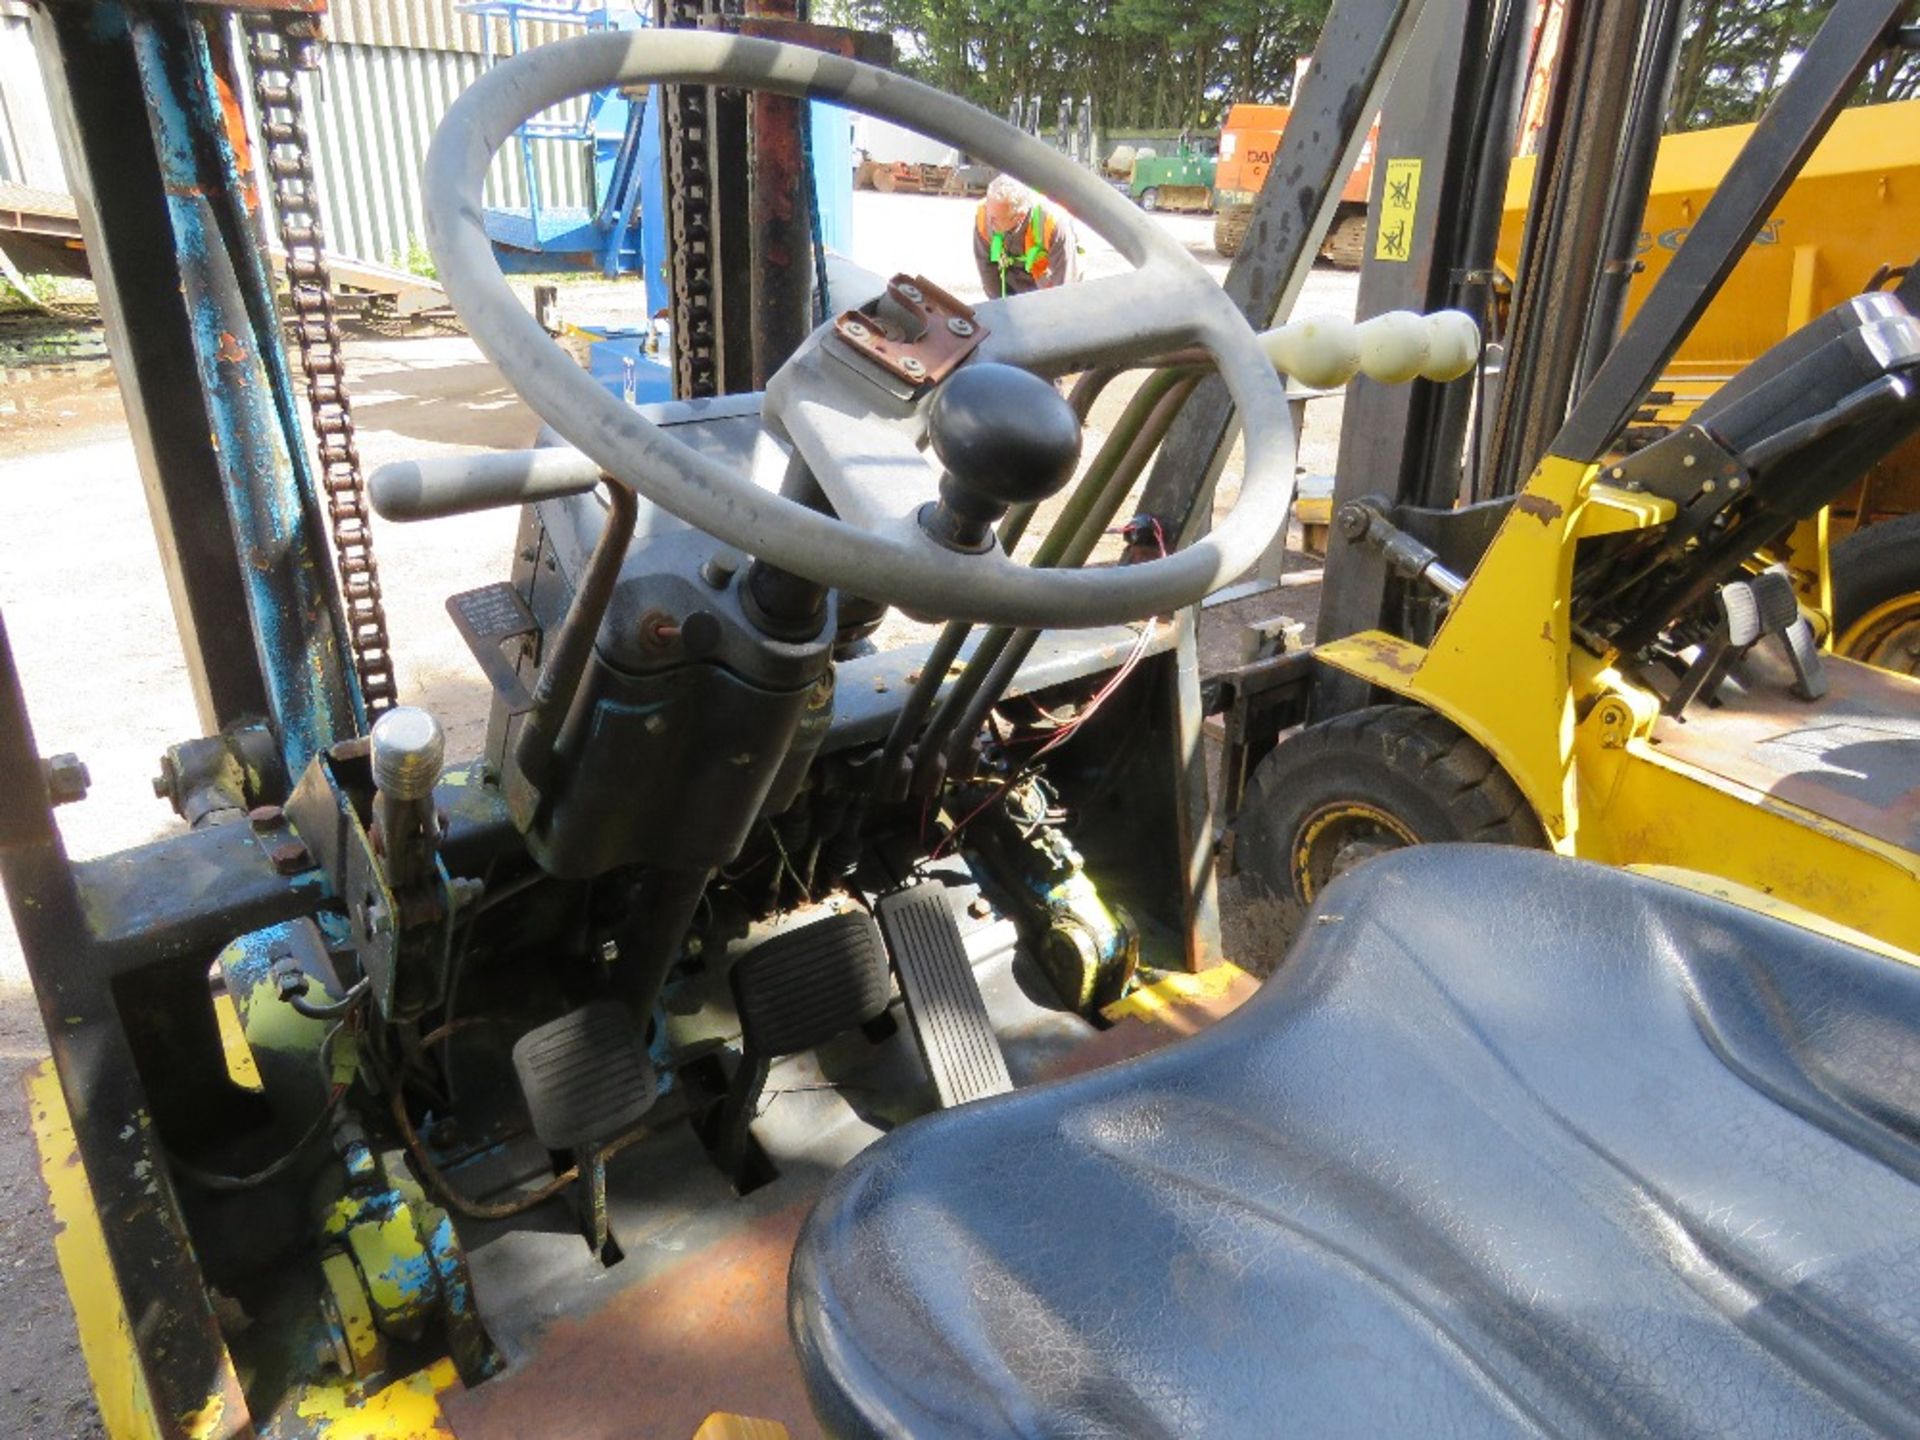 MITSUBISHI FG15 GAS POWERED FORKLIFT. WHEN TESTED WAS SEEN TO START AND RUN BRIEFLY BUT CUTTING OUT. - Image 6 of 9